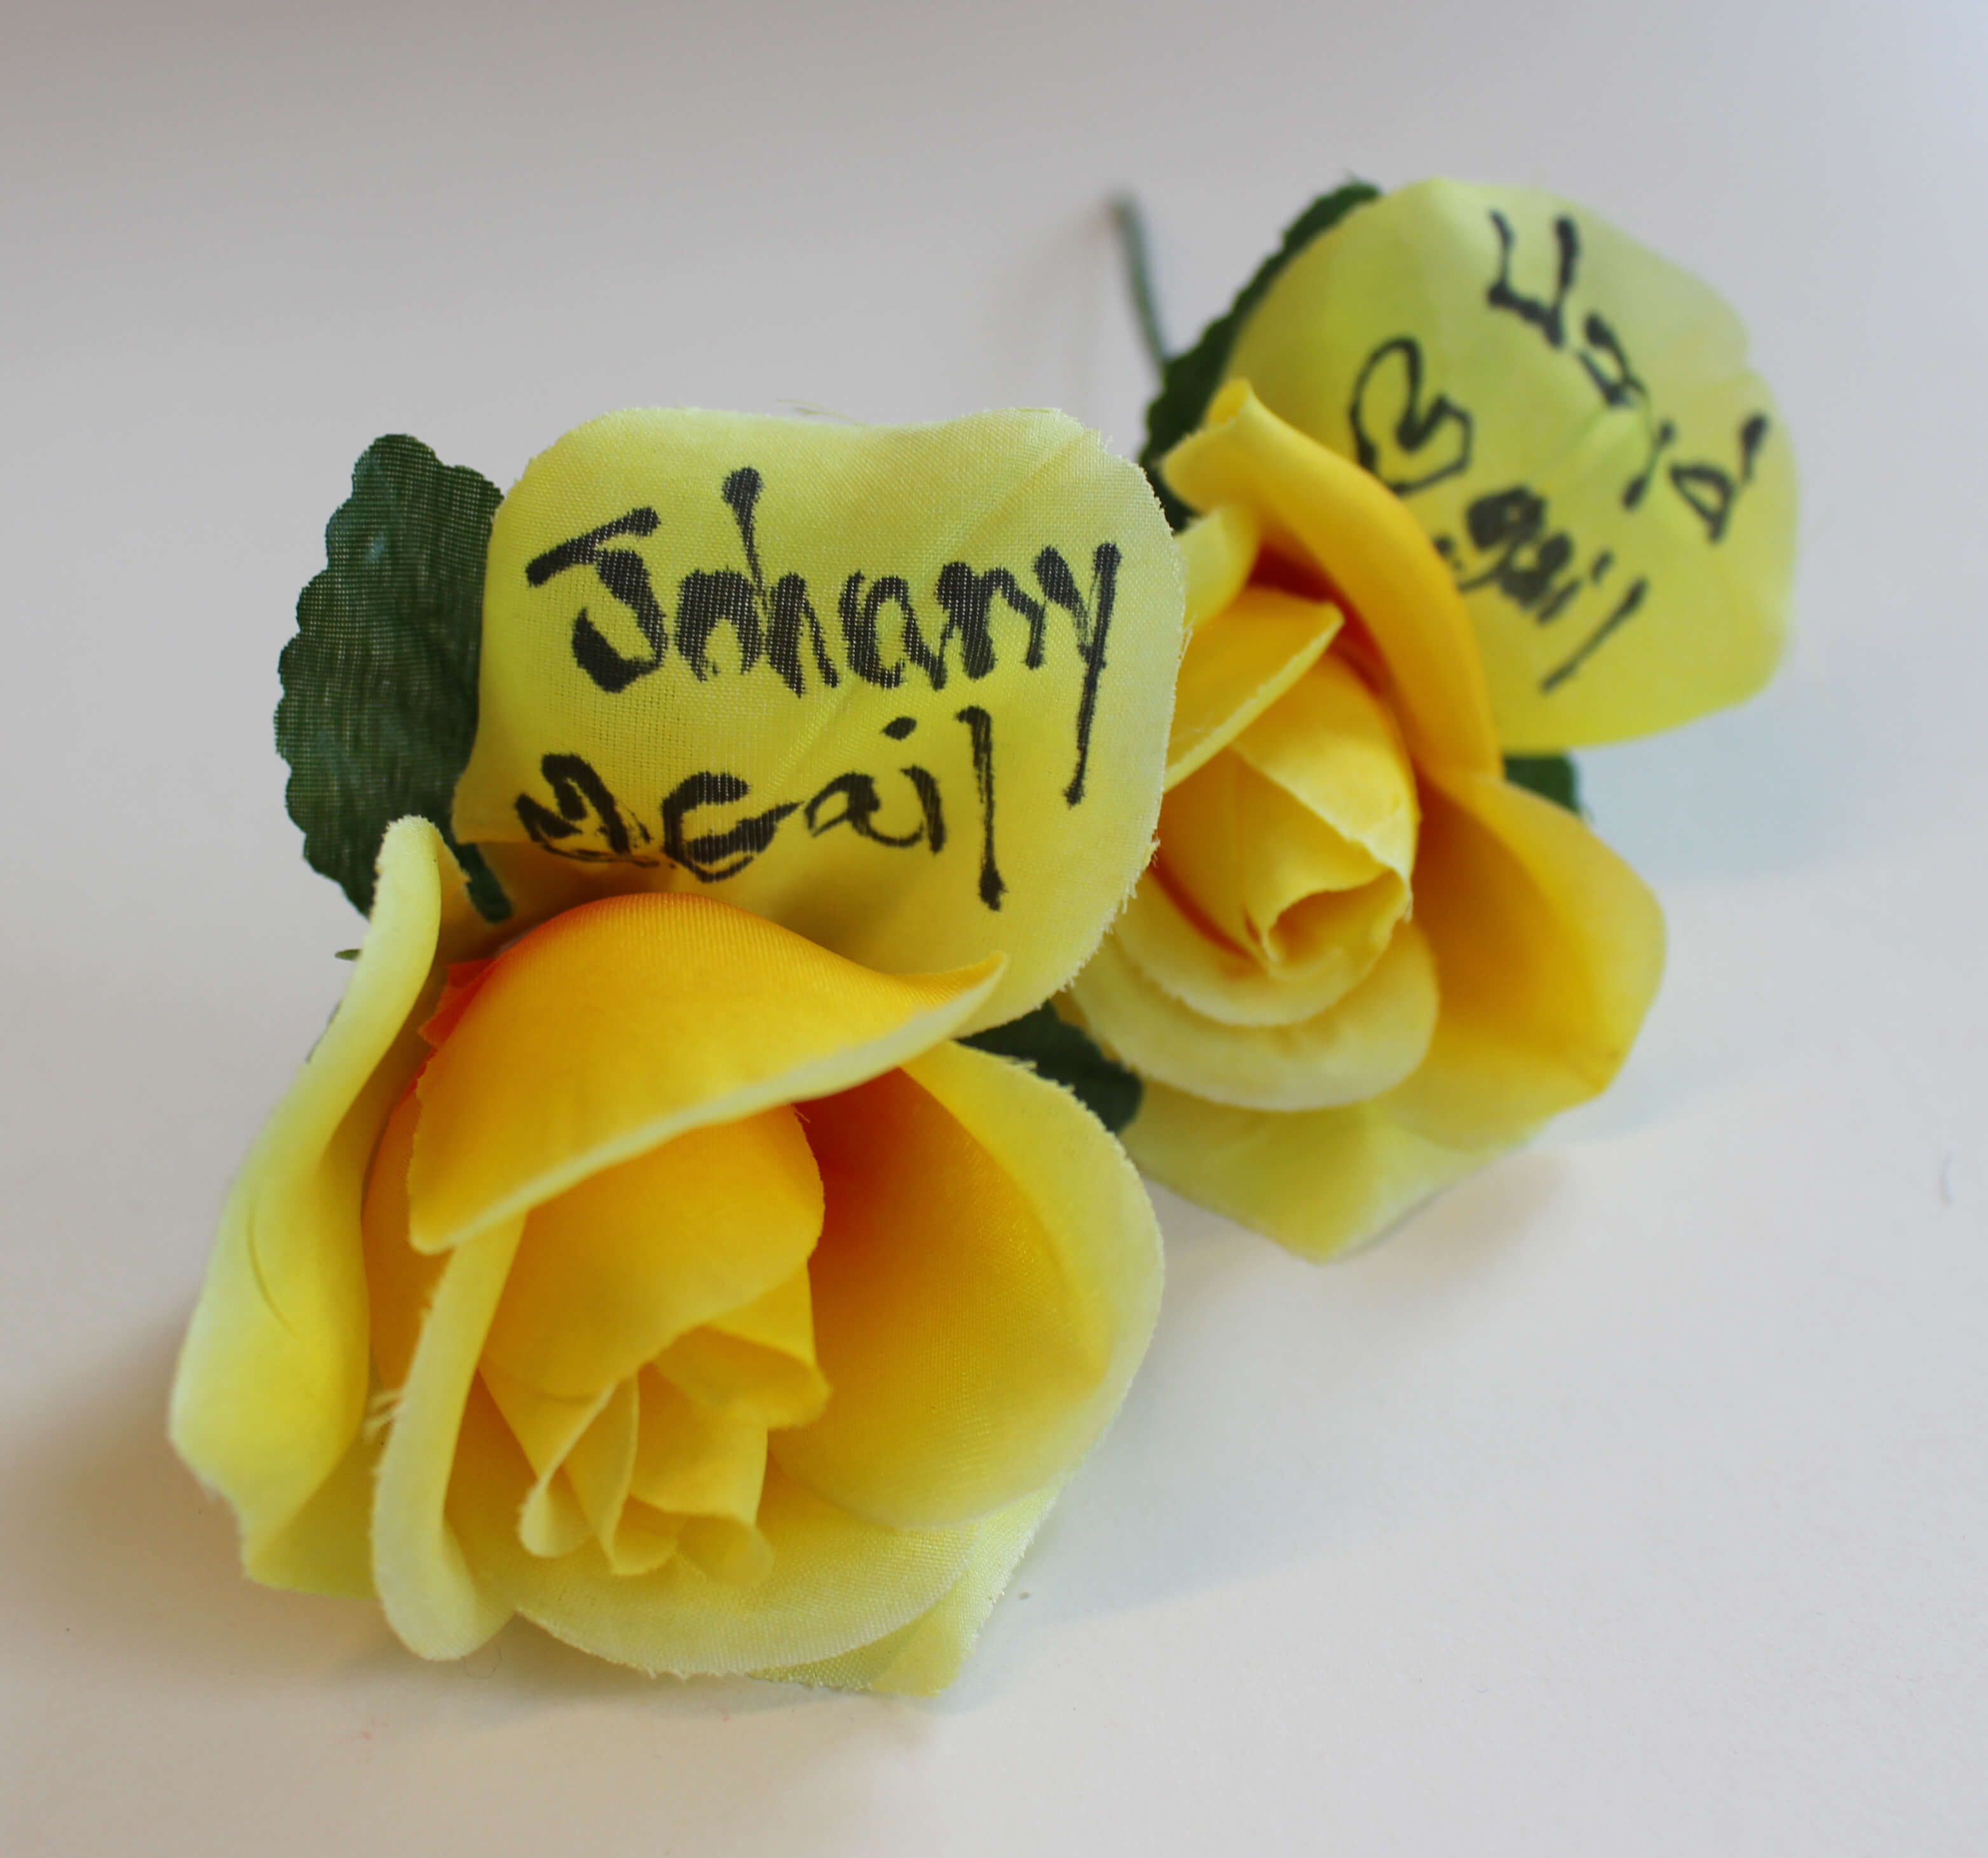 Two fake yellow roses with notes written on them.